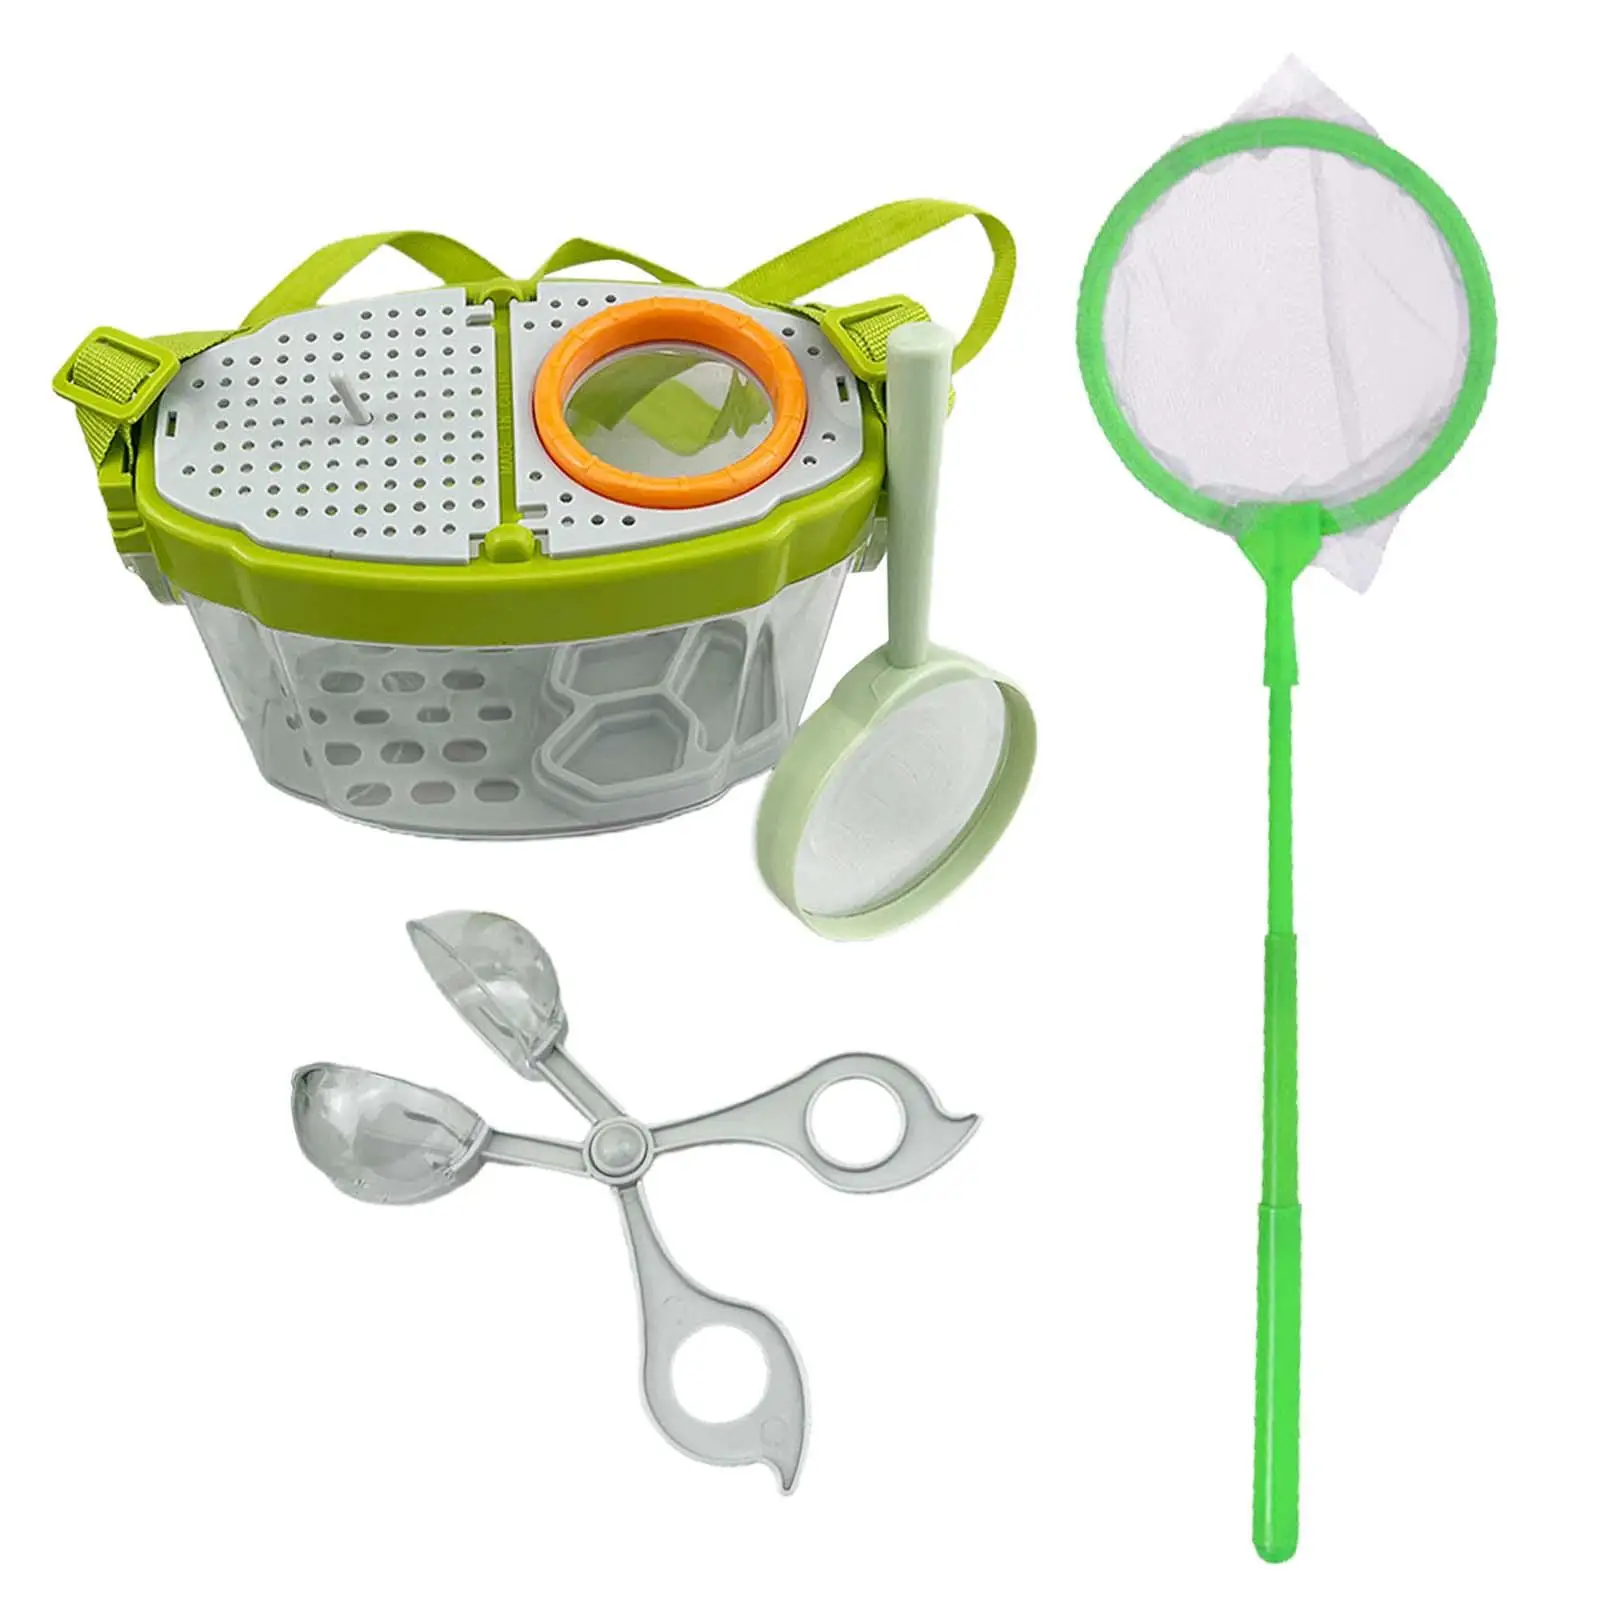 Bug Catcher Portable Magnifying Glass Container for Boys Girls Kids Children